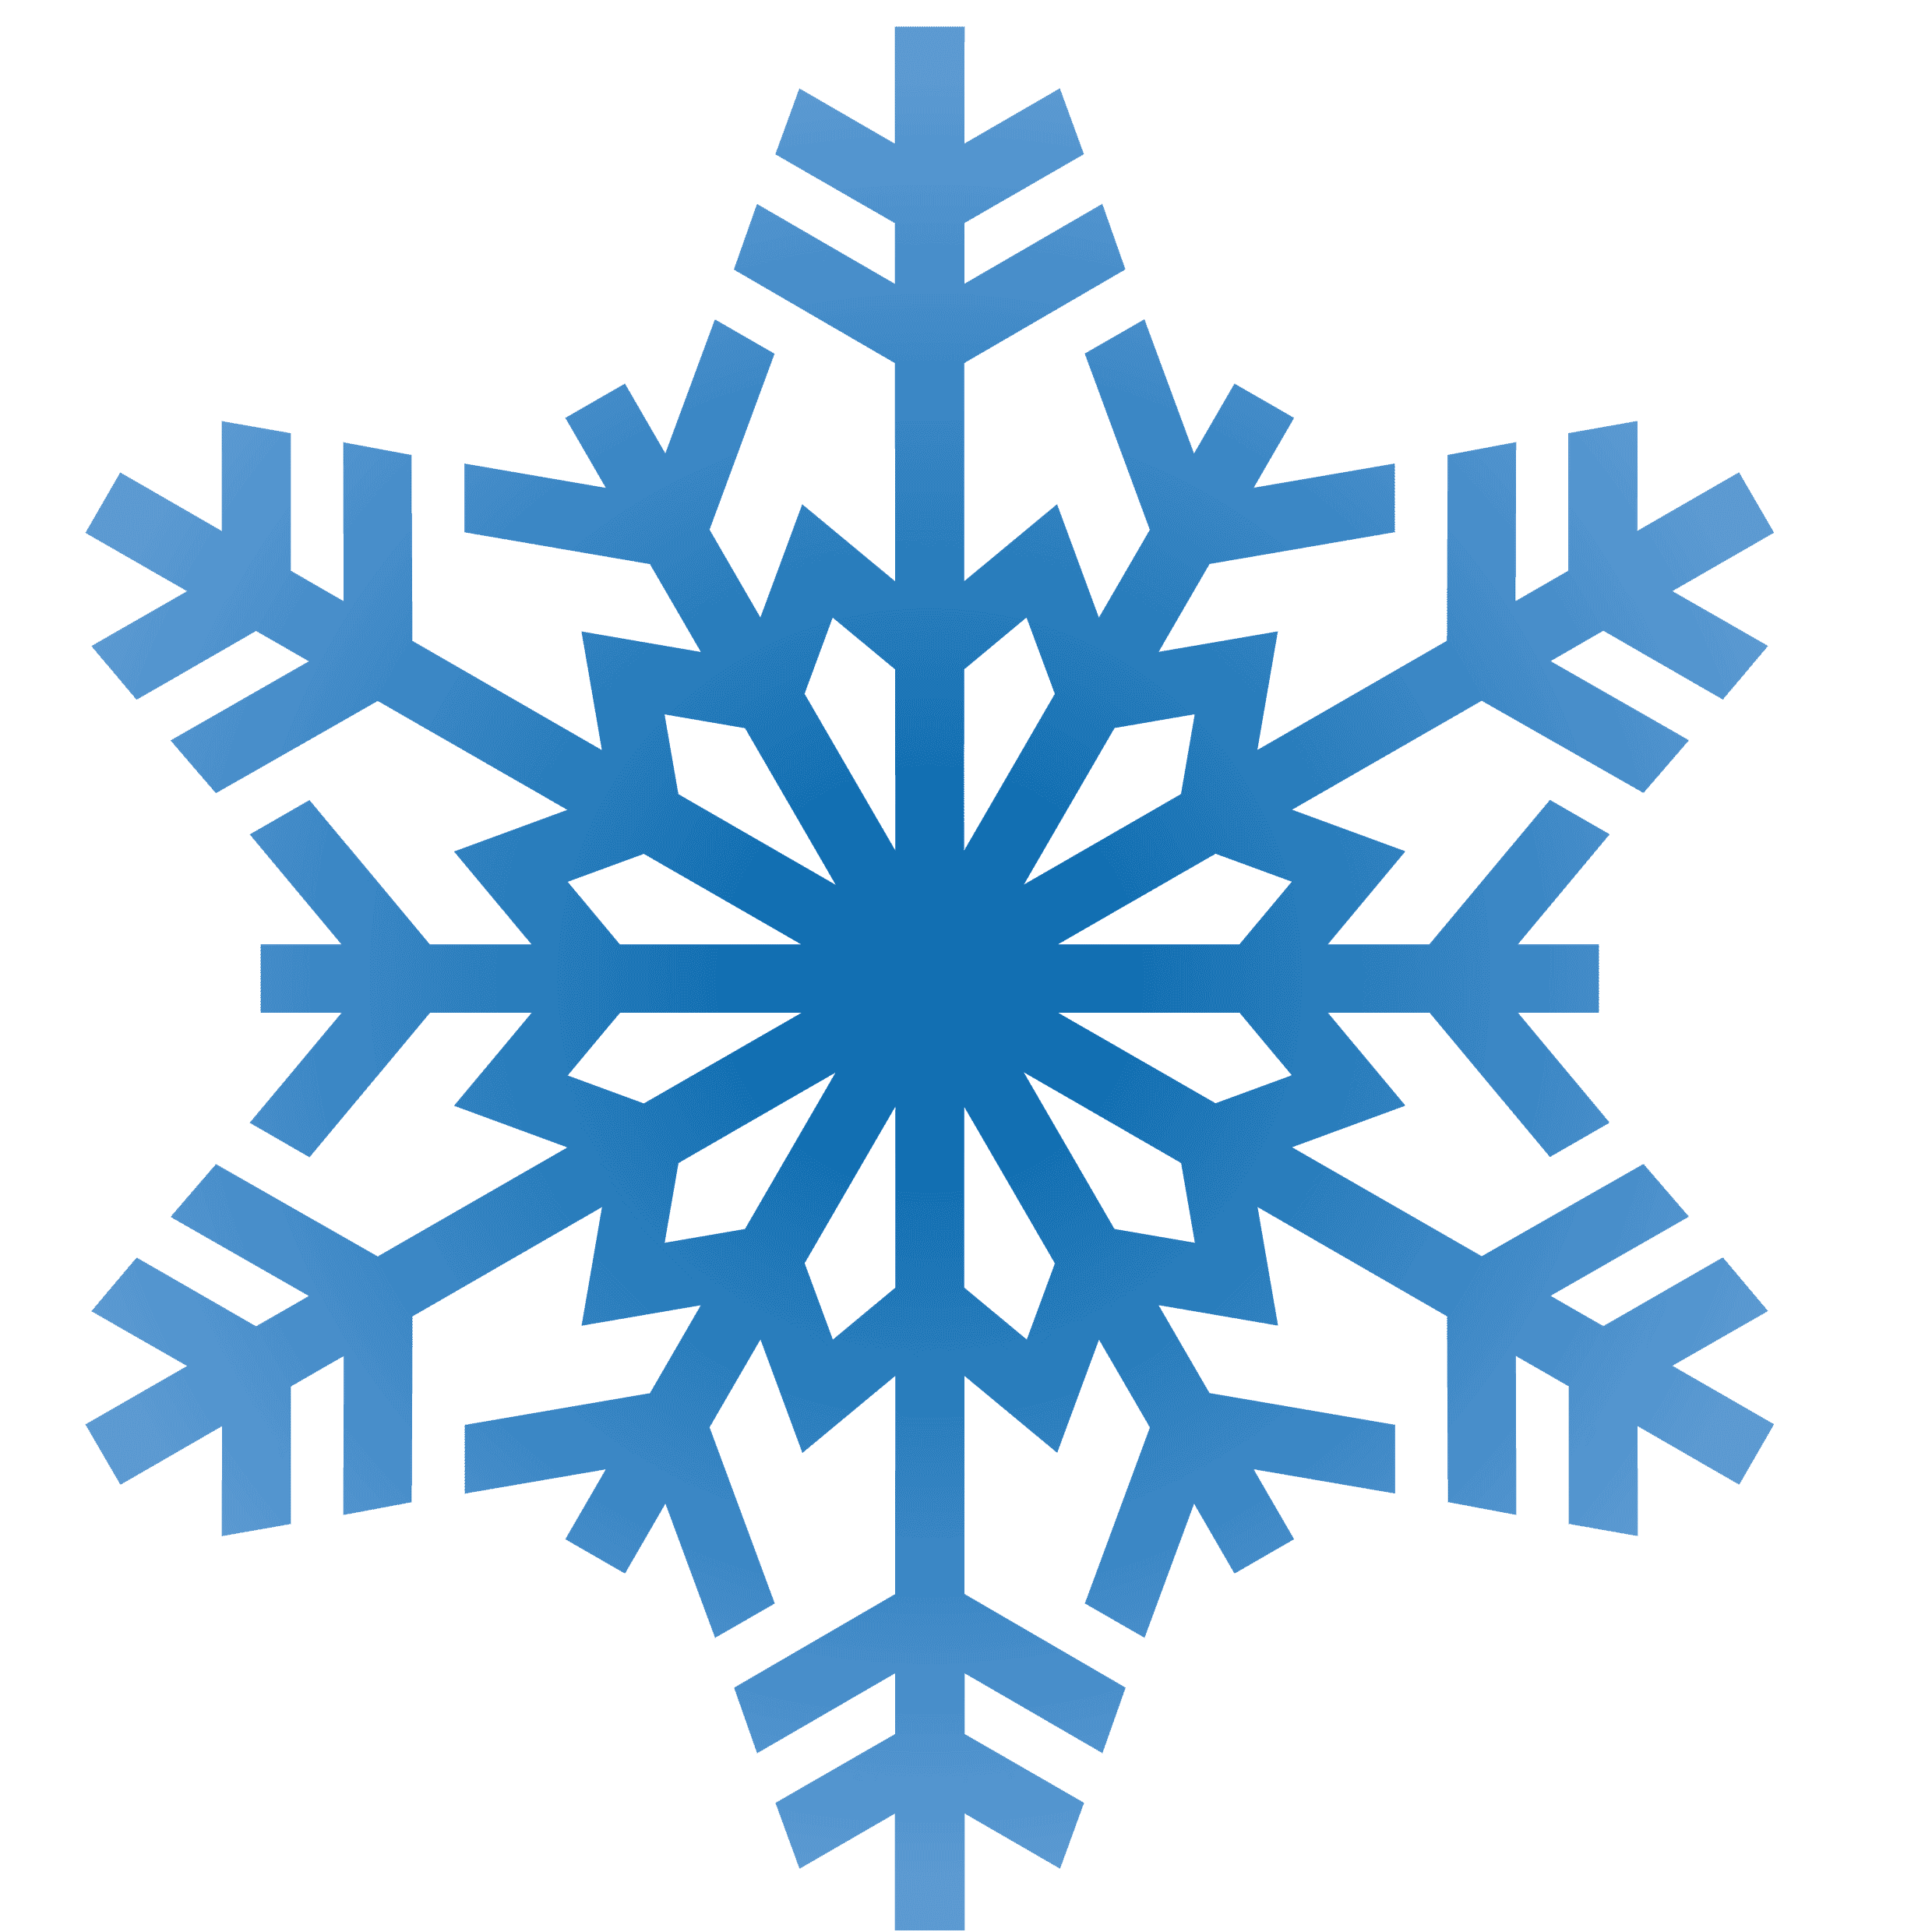 Download PNG image - Frozen Snowflake PNG Image 